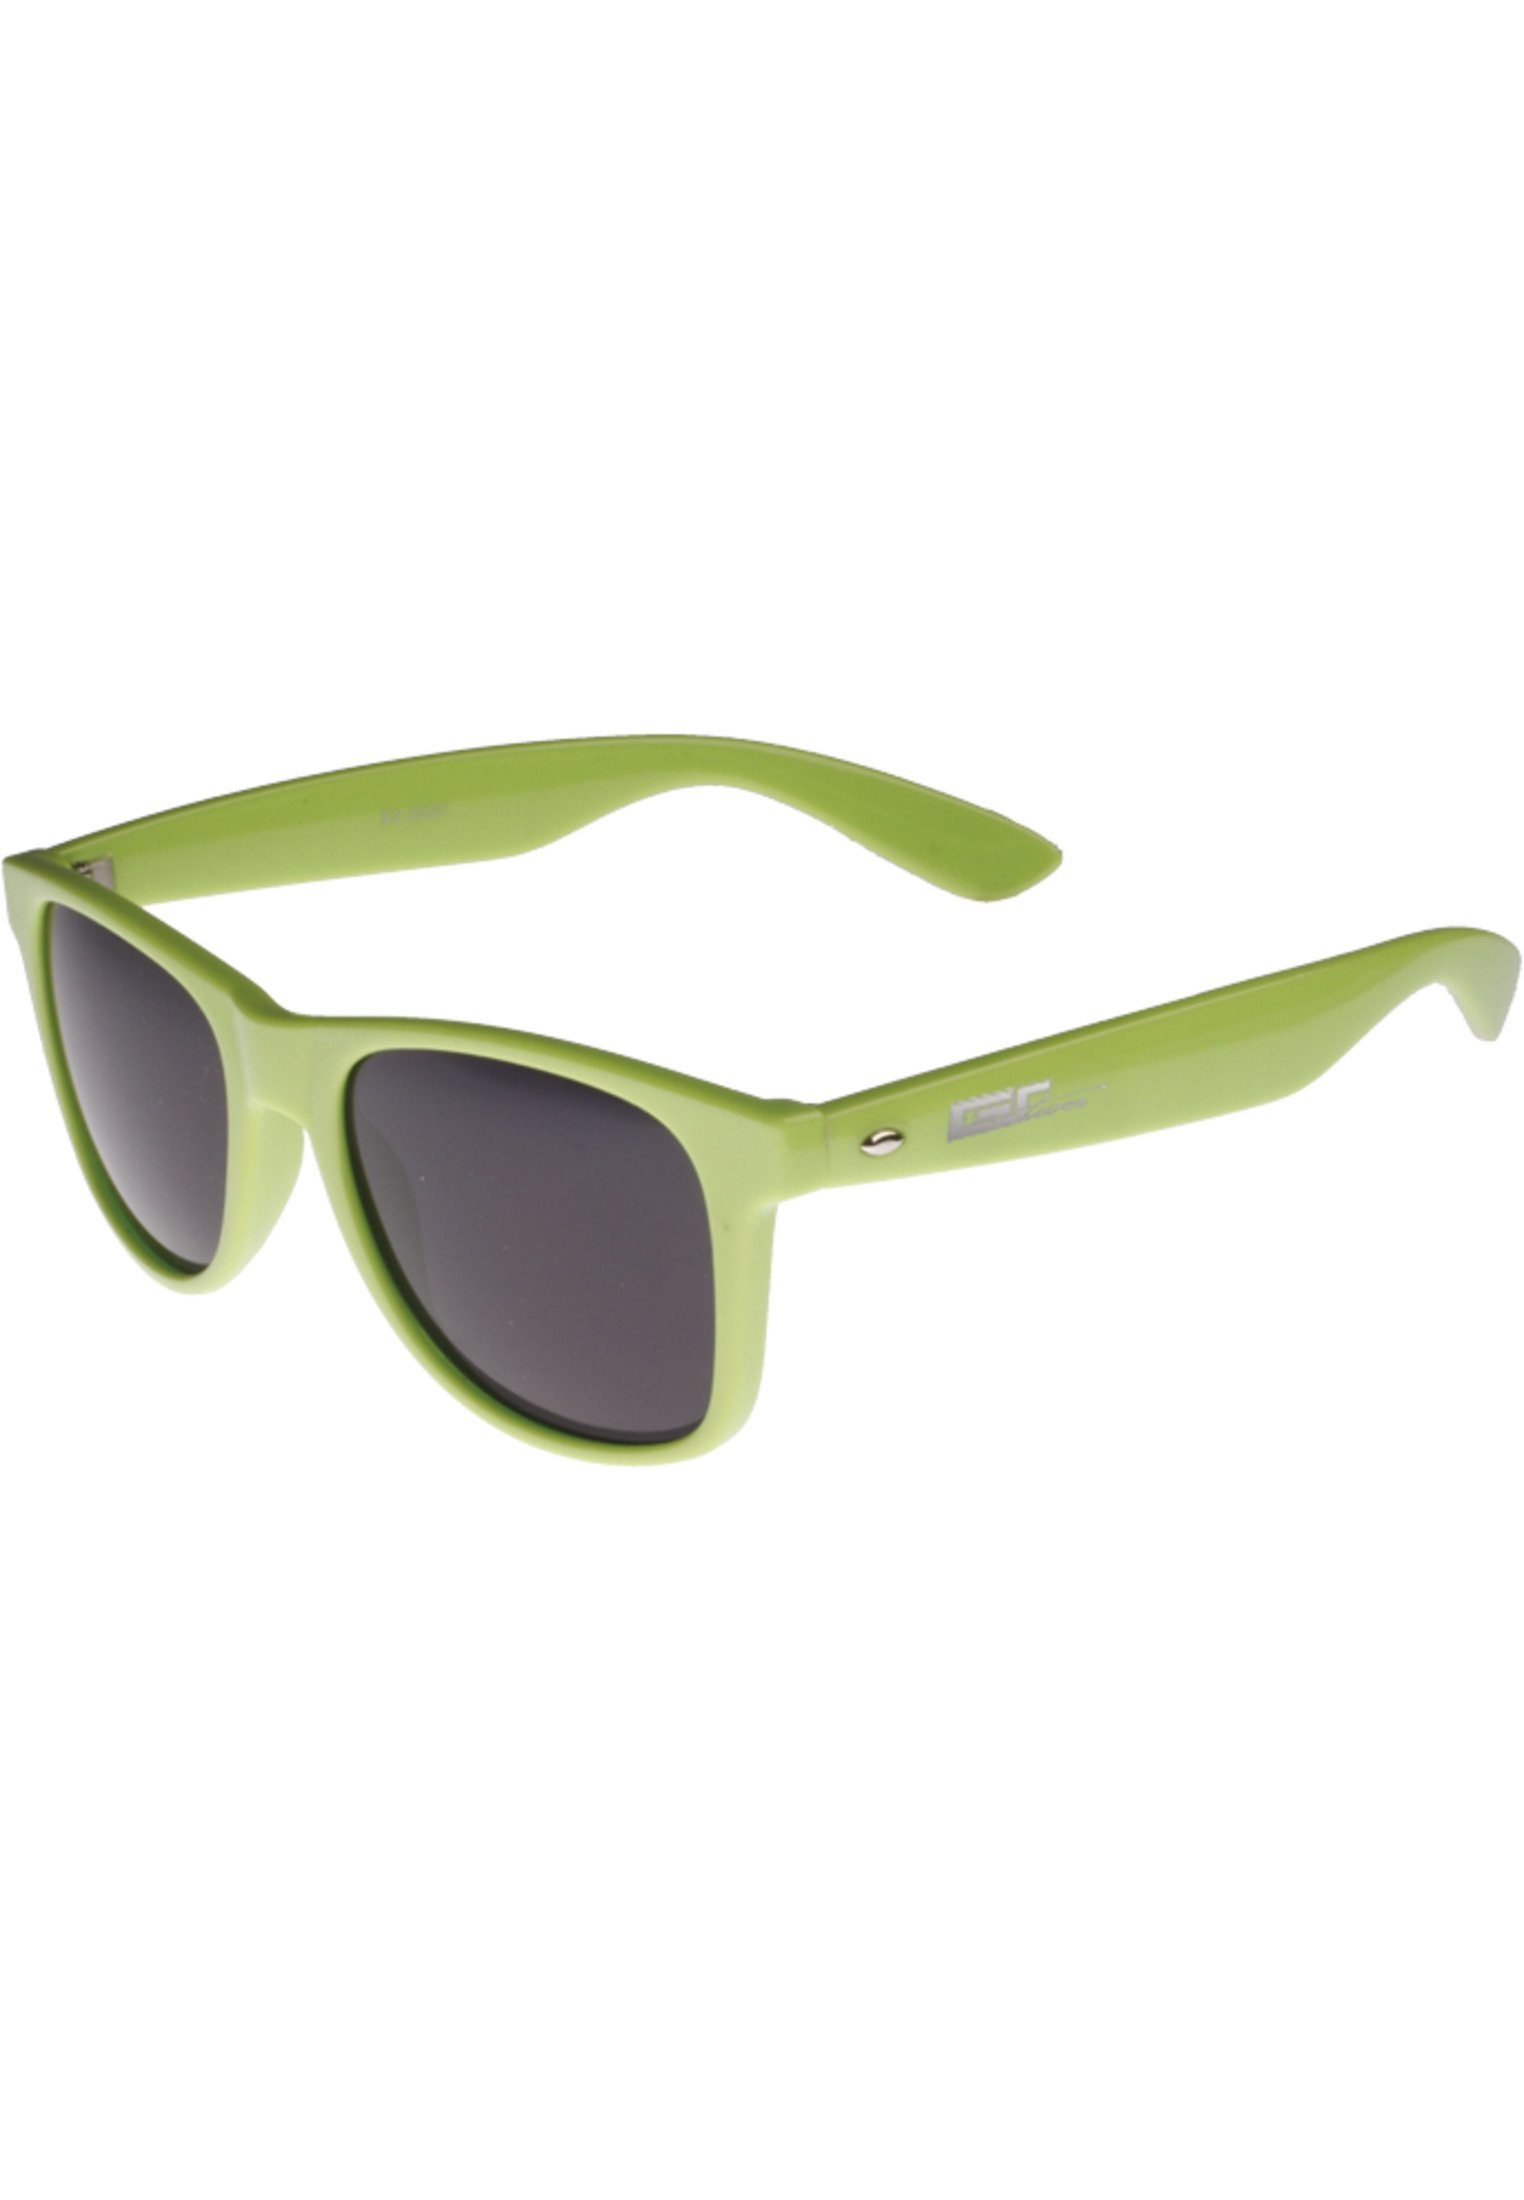 MSTRDS Sonnenbrille Accessoires Groove Shades limegreen GStwo